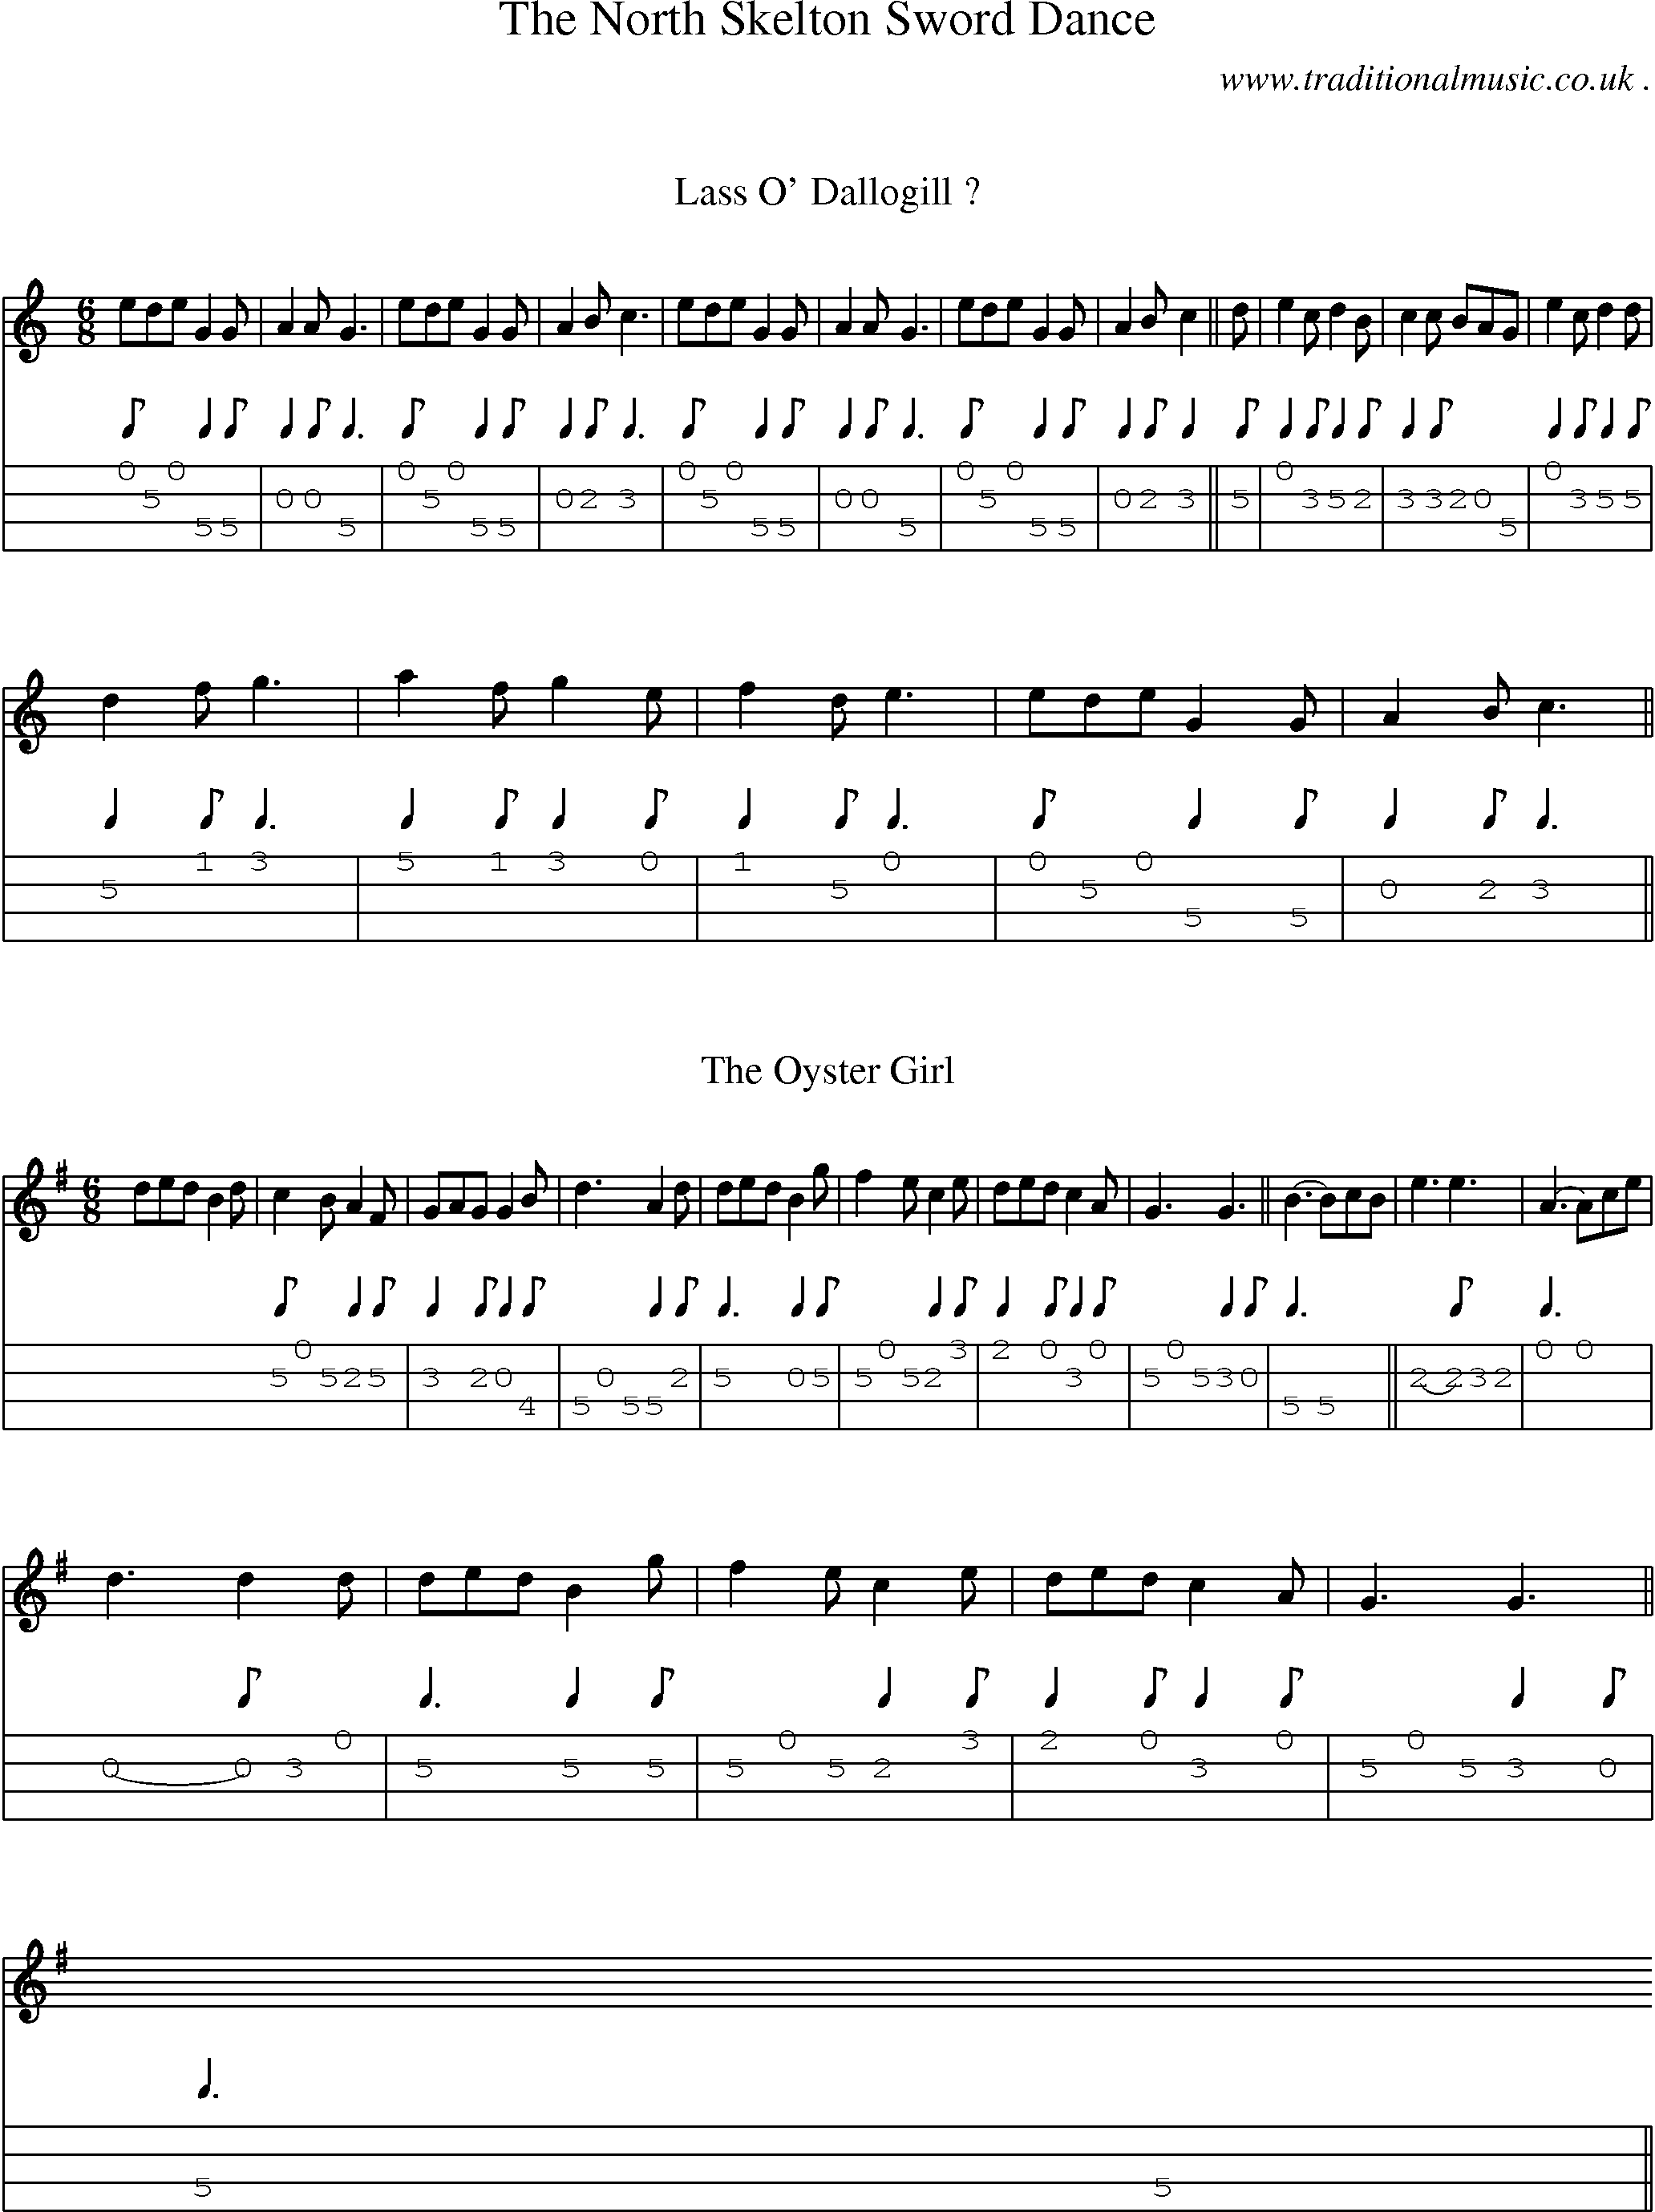 Sheet-Music and Mandolin Tabs for The North Skelton Sword Dance